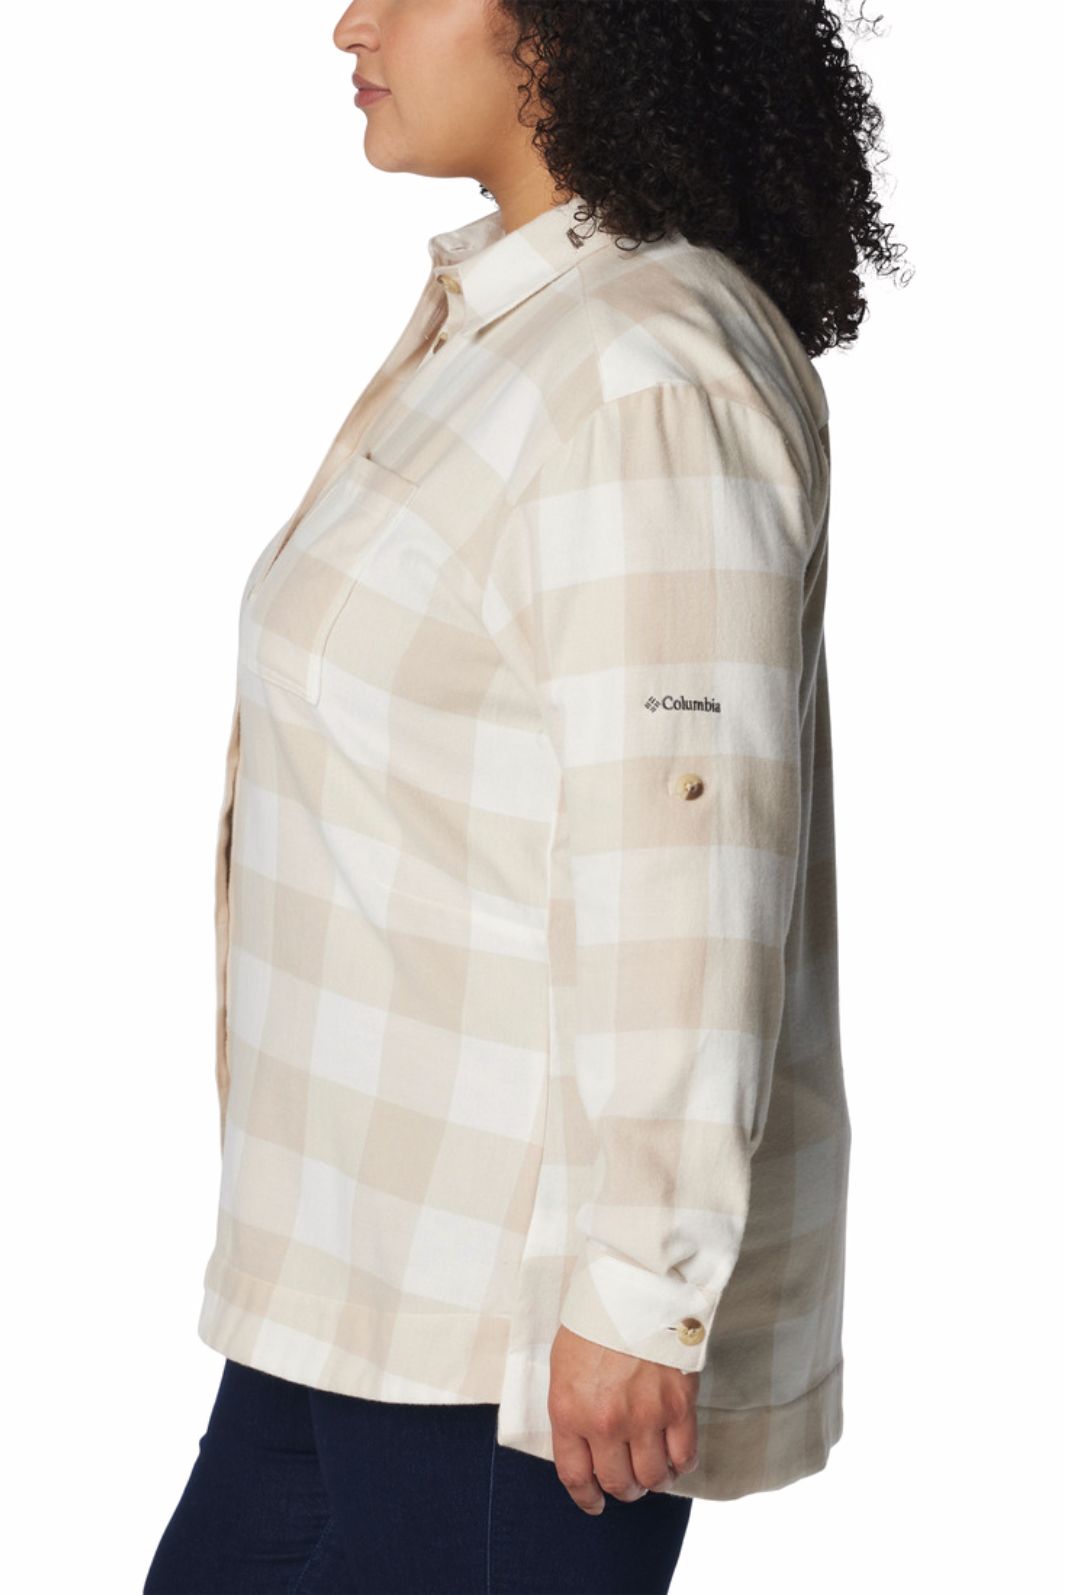 Chemise Flannelle Holly Hideaway™  Taille Plus de Columbia